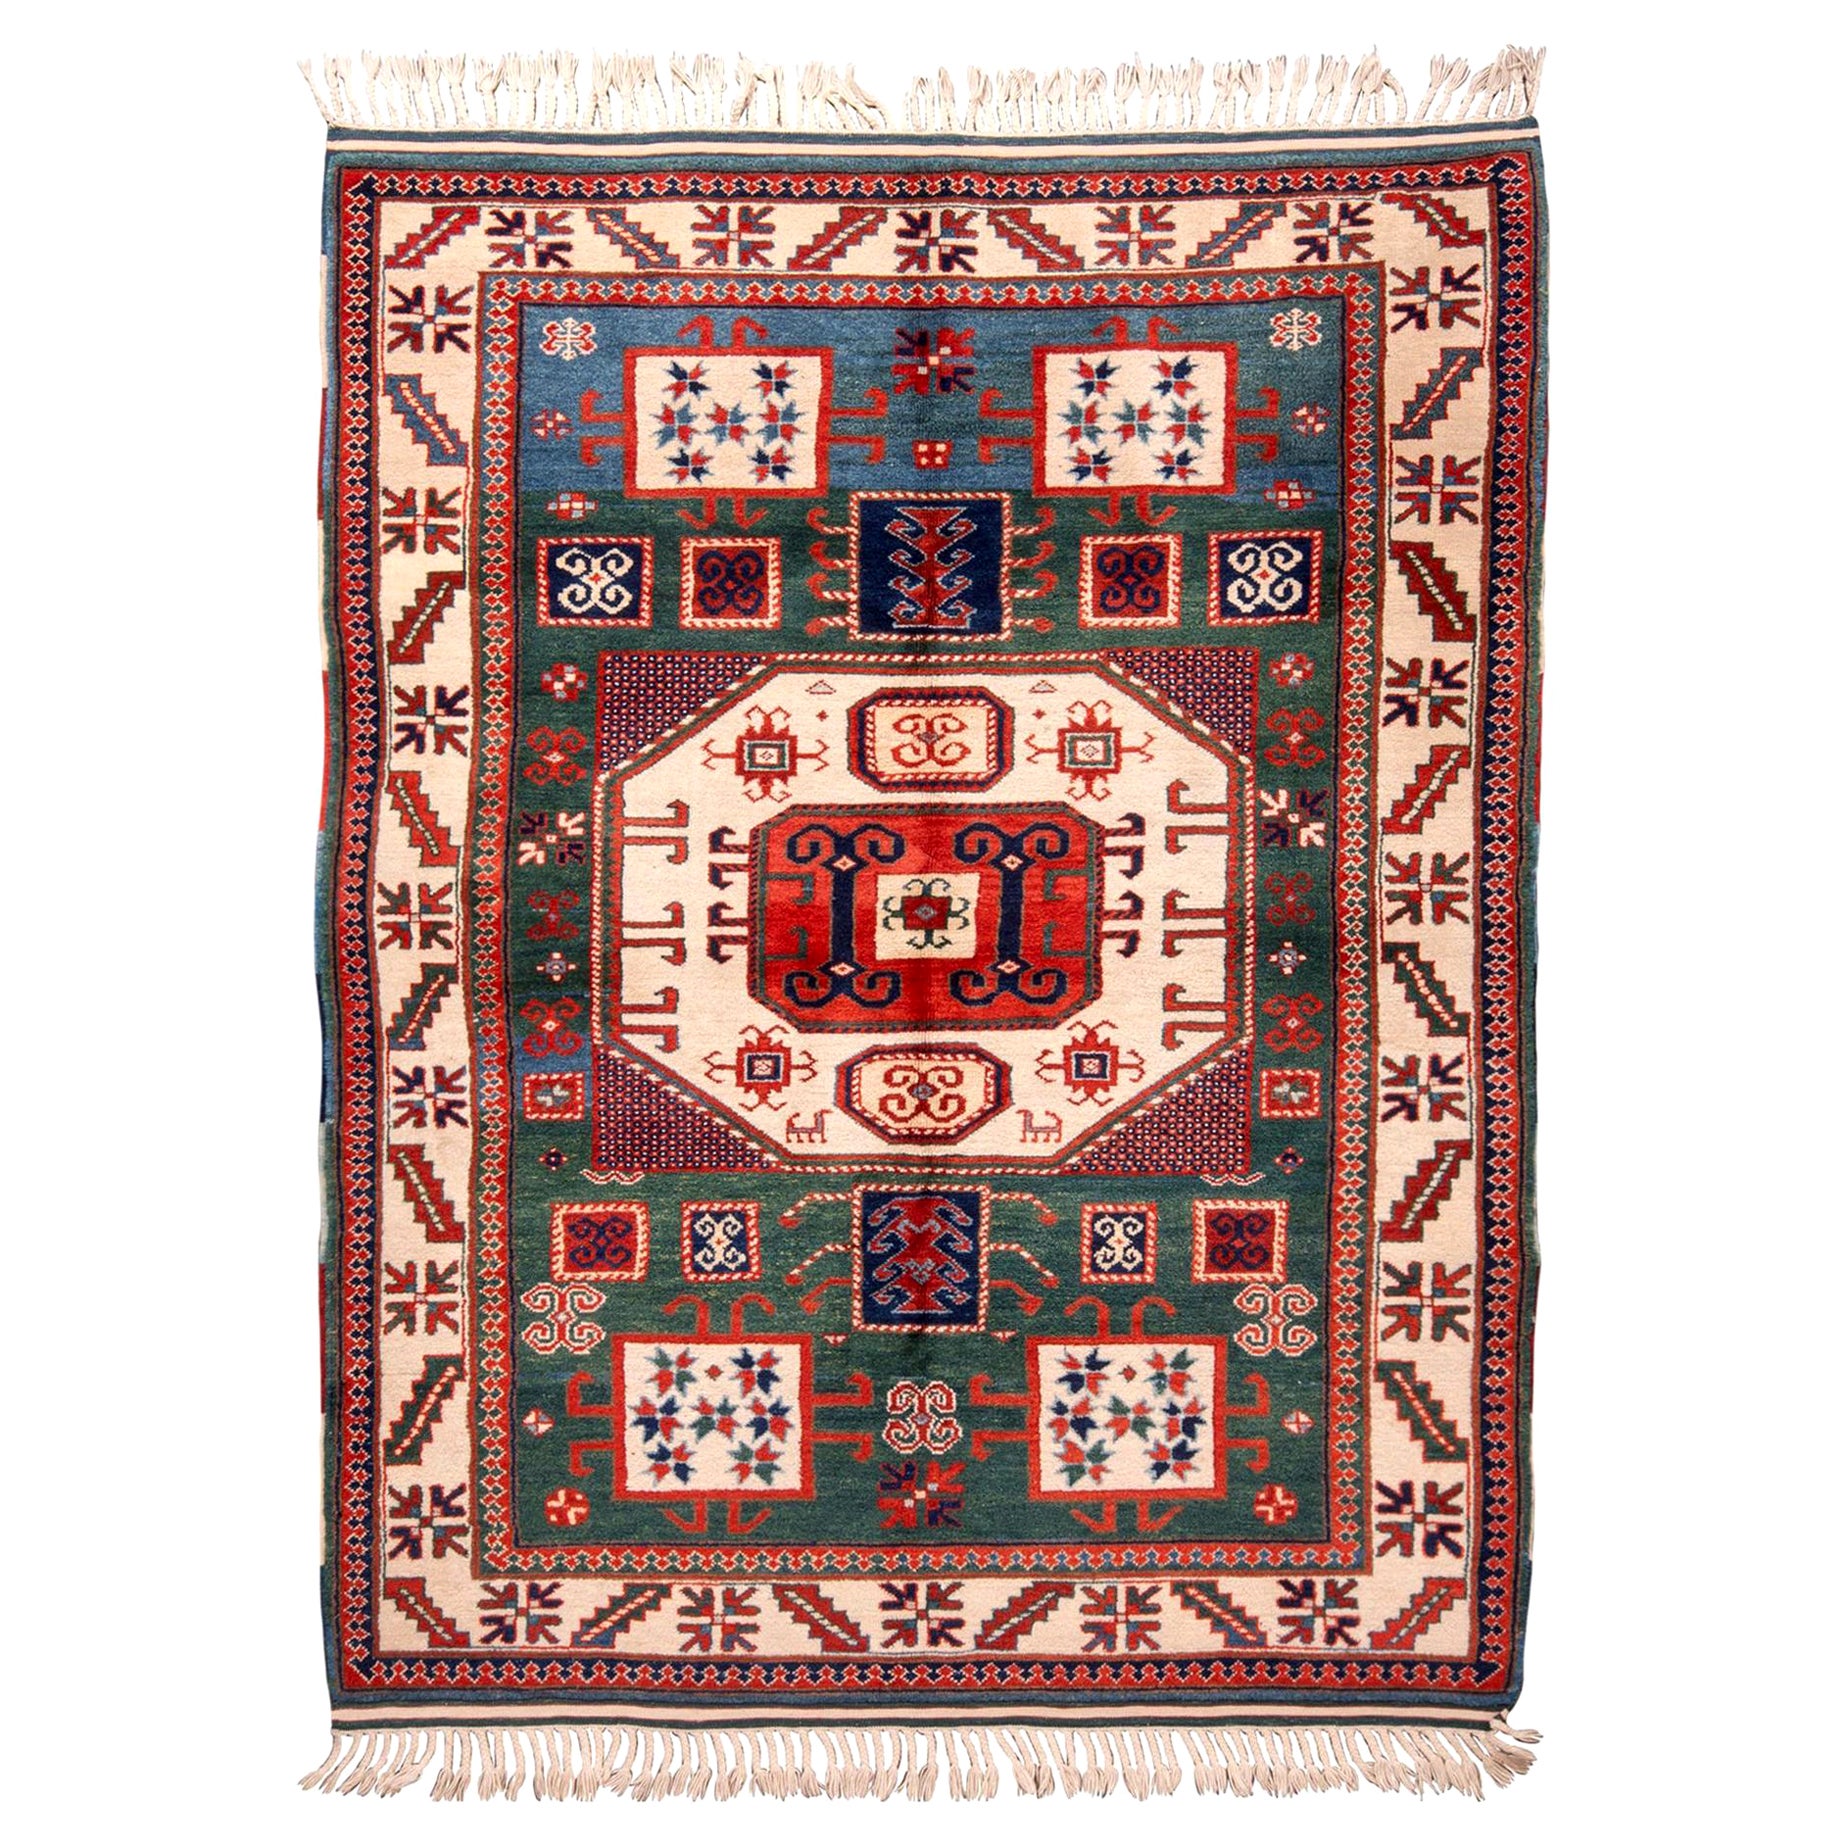 Rug & Kilim's New Kazak Transitional Red and Green Wool Rug with Horn Motifs (en anglais seulement) en vente